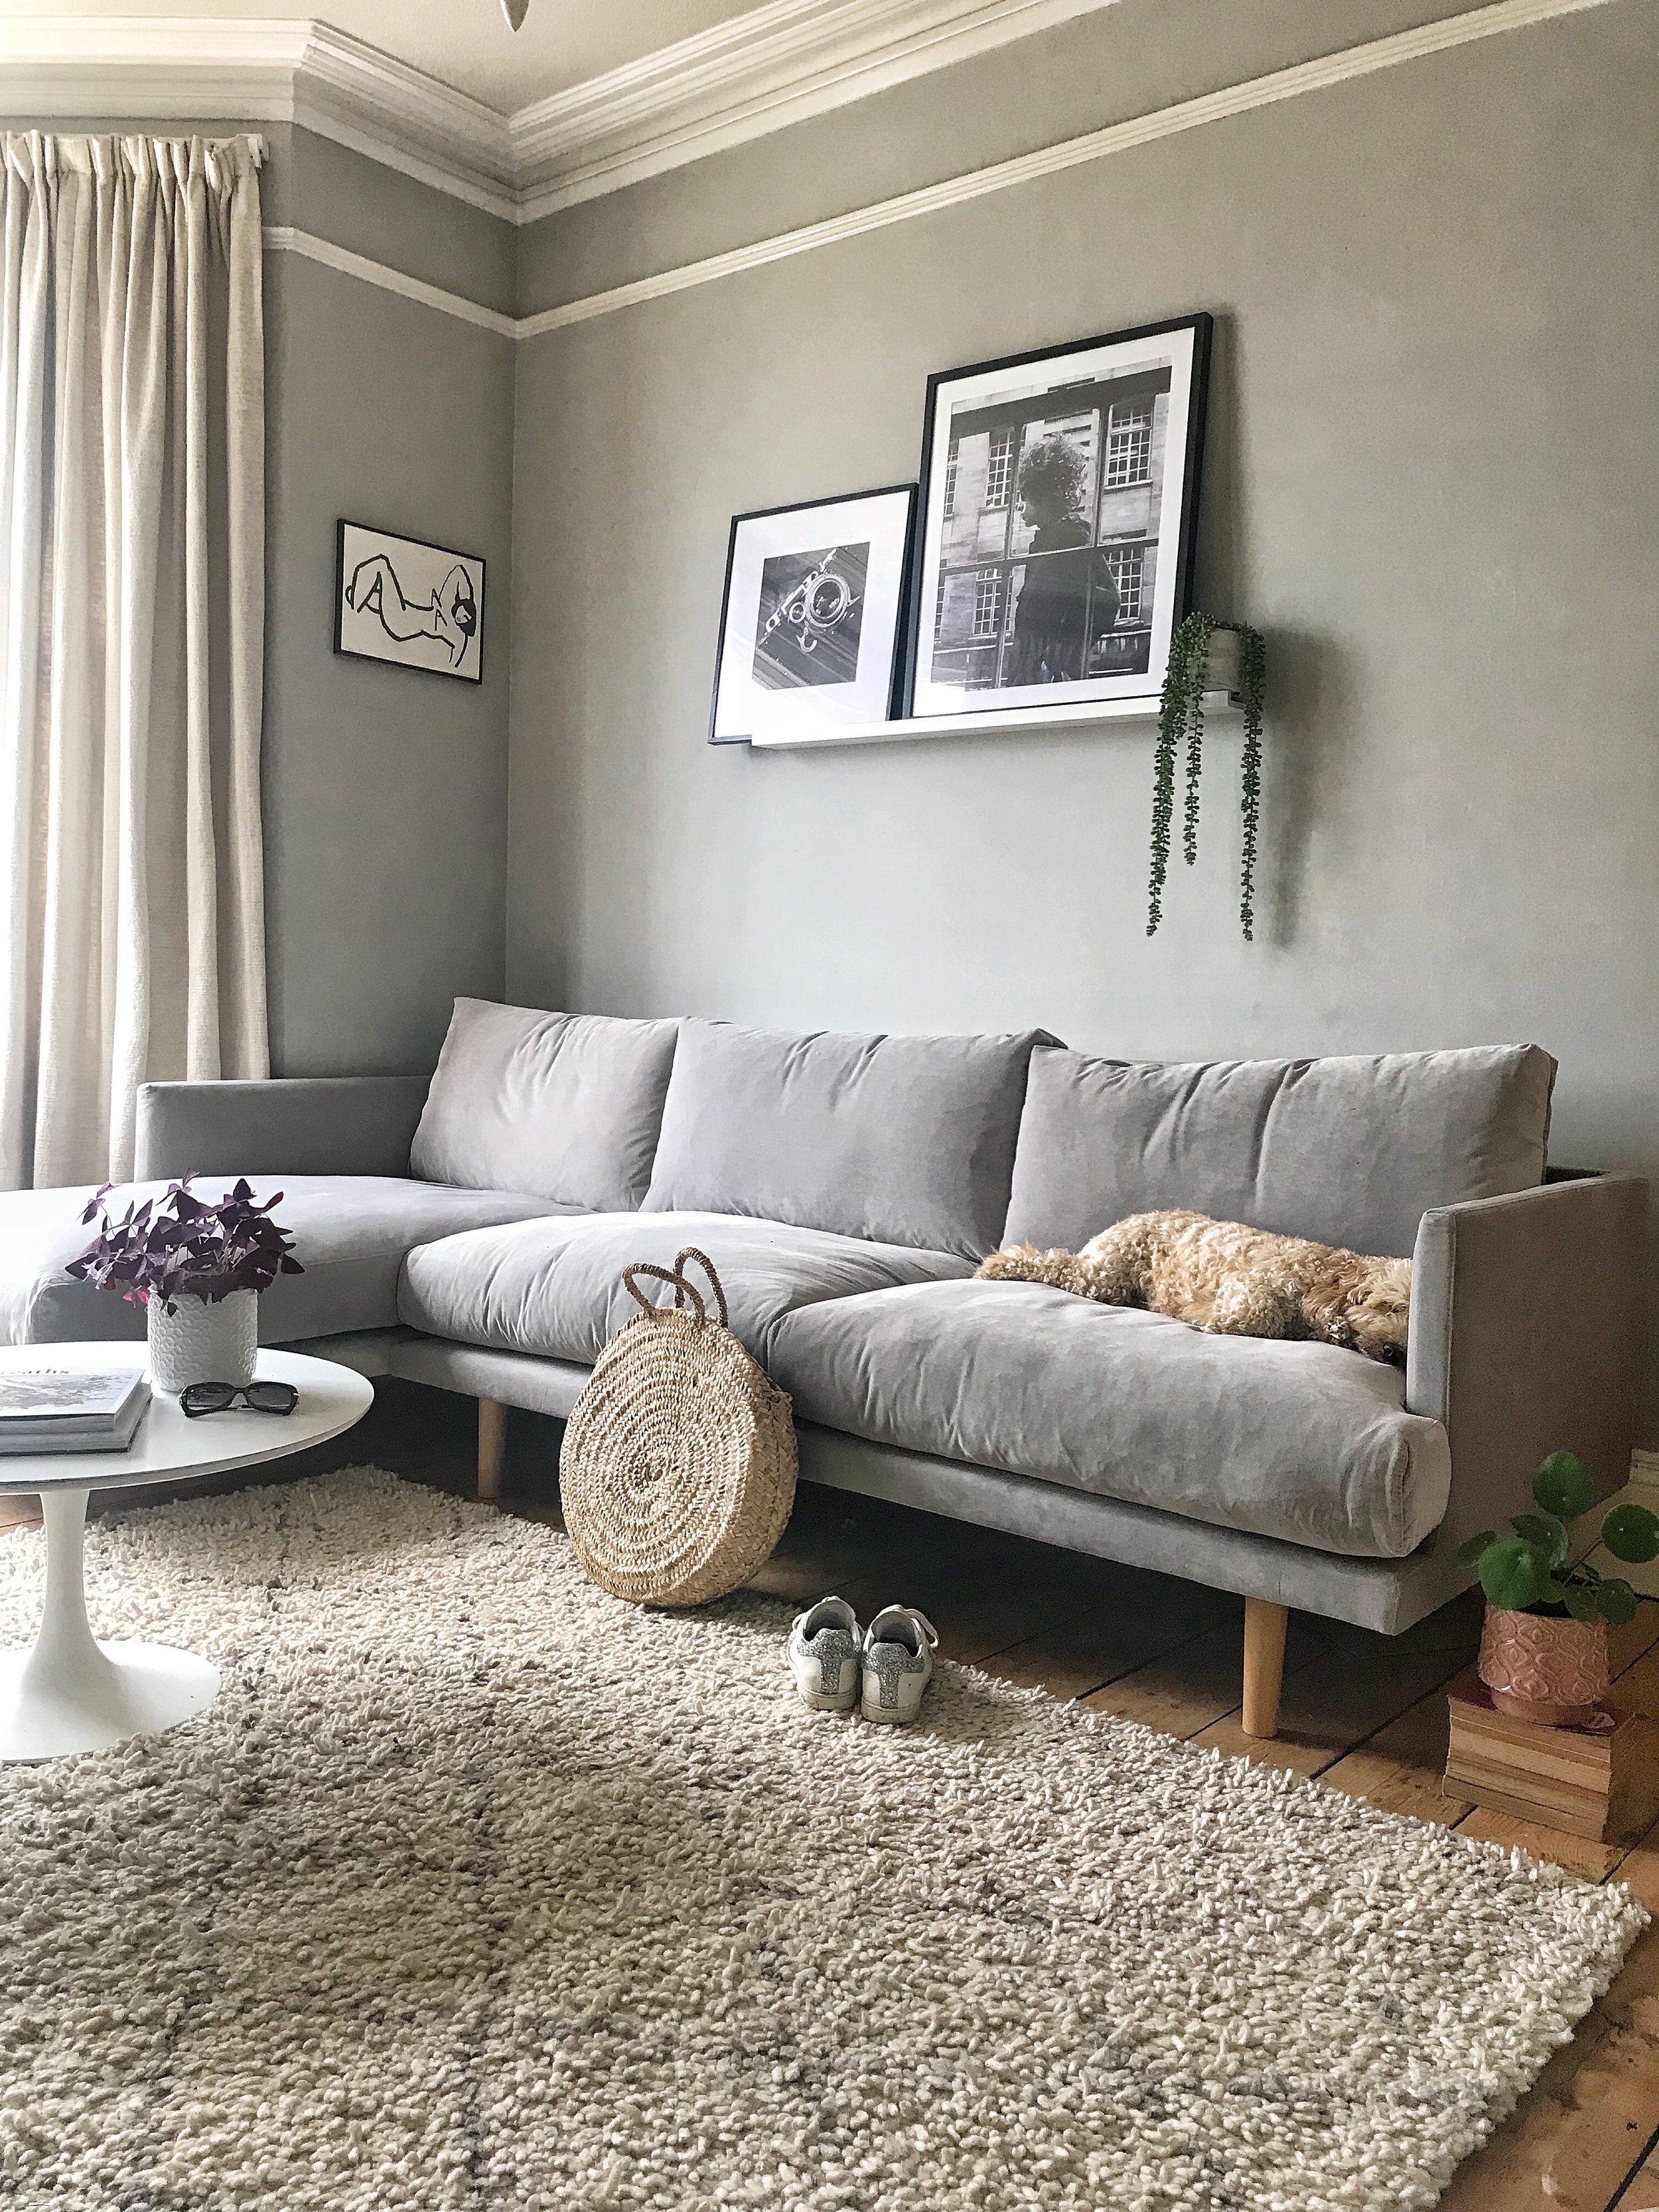 How I Chose my Love Your Home Sofa — Dee Campling